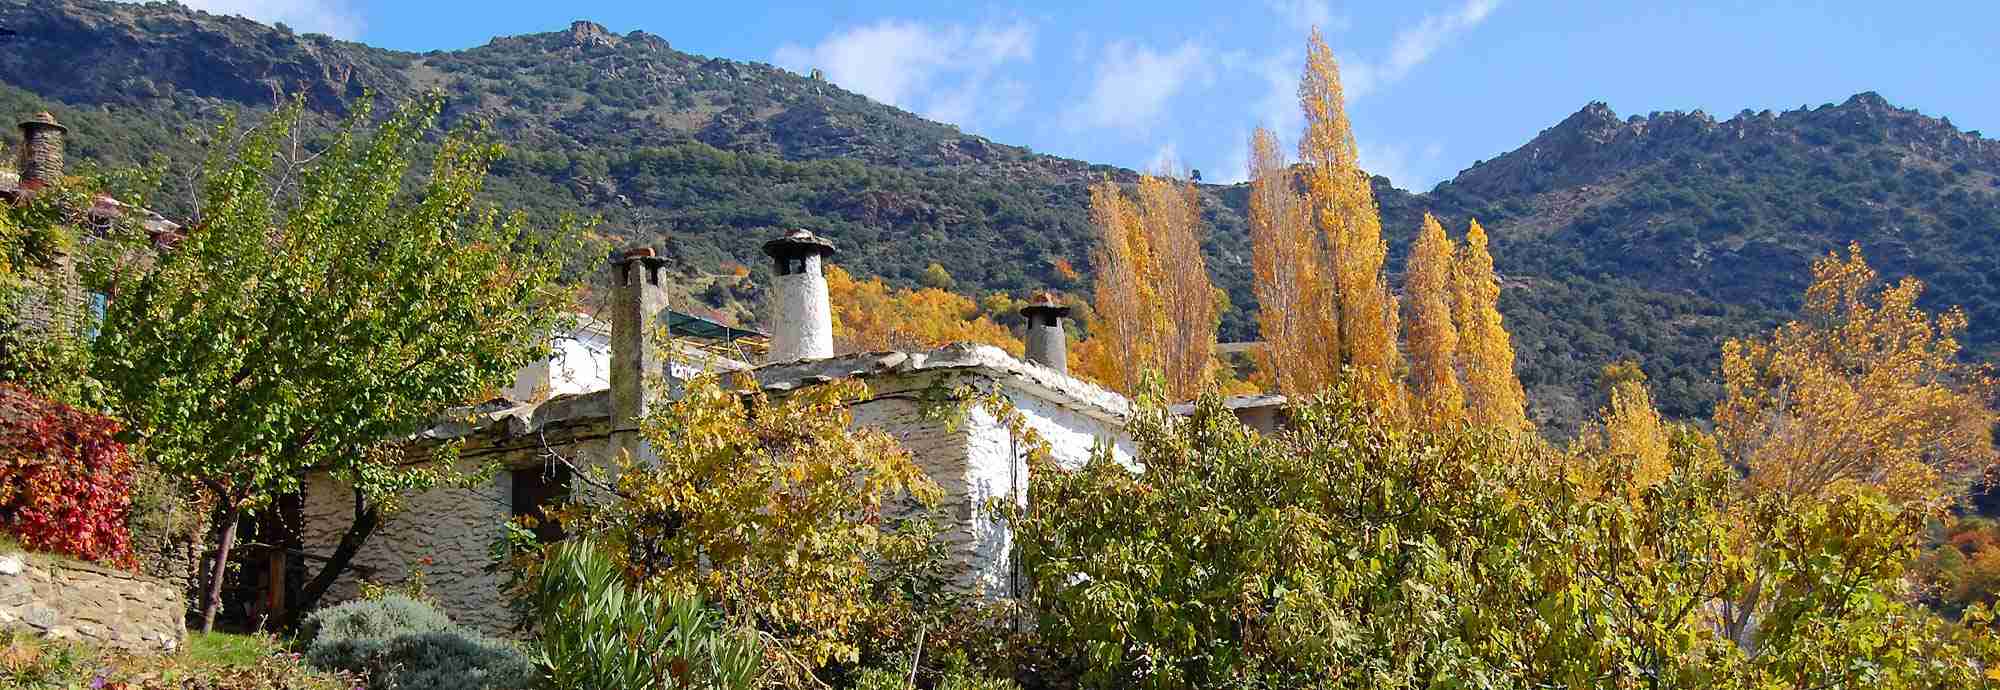 Rustic rental cottage with private gardens in Bubion, Alpujarras